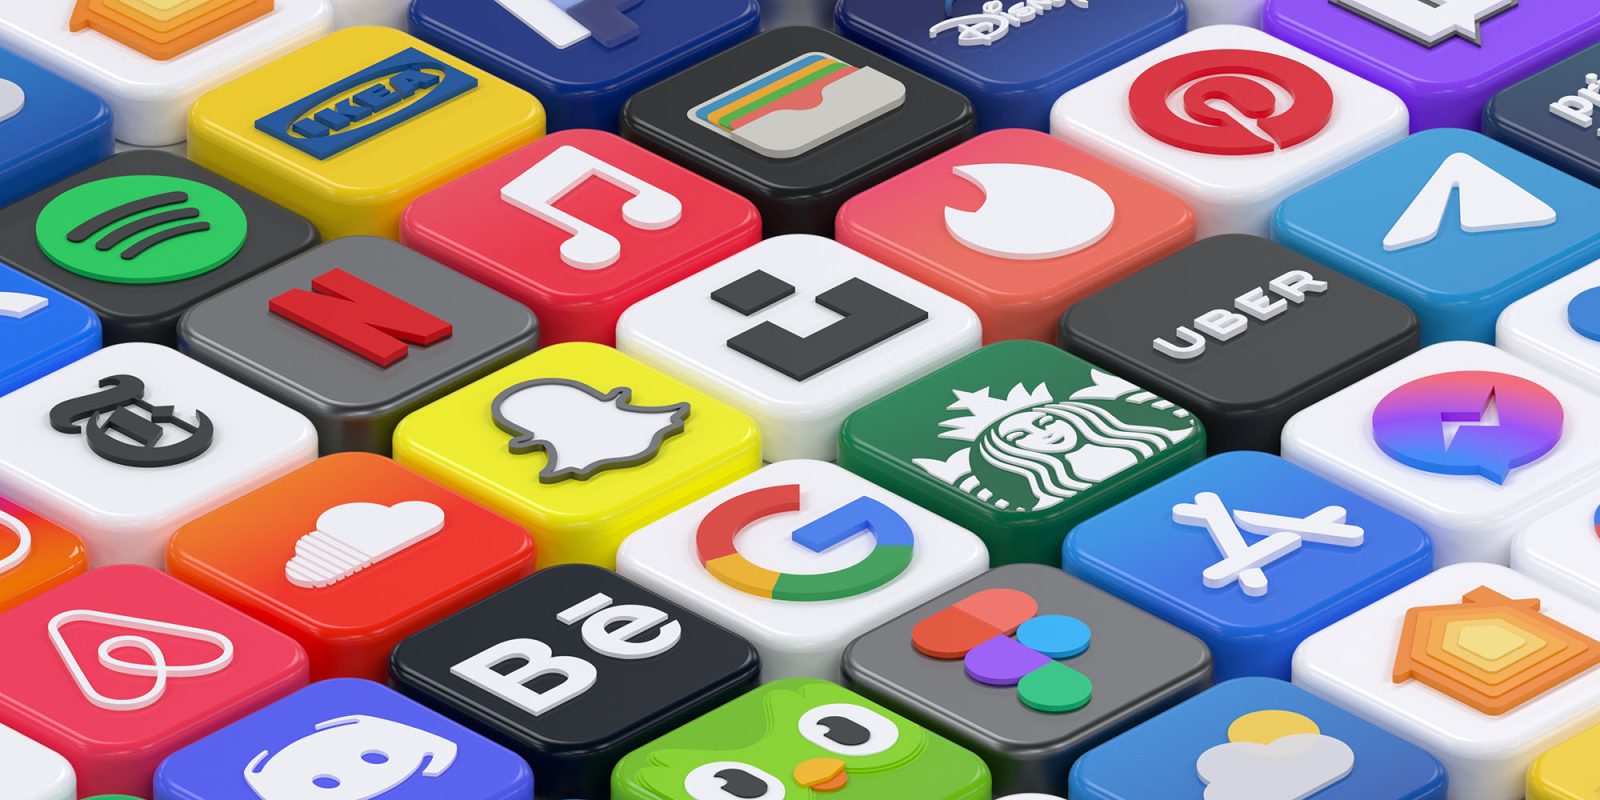 Five different App Stores | App icons depicted as physical building blocks